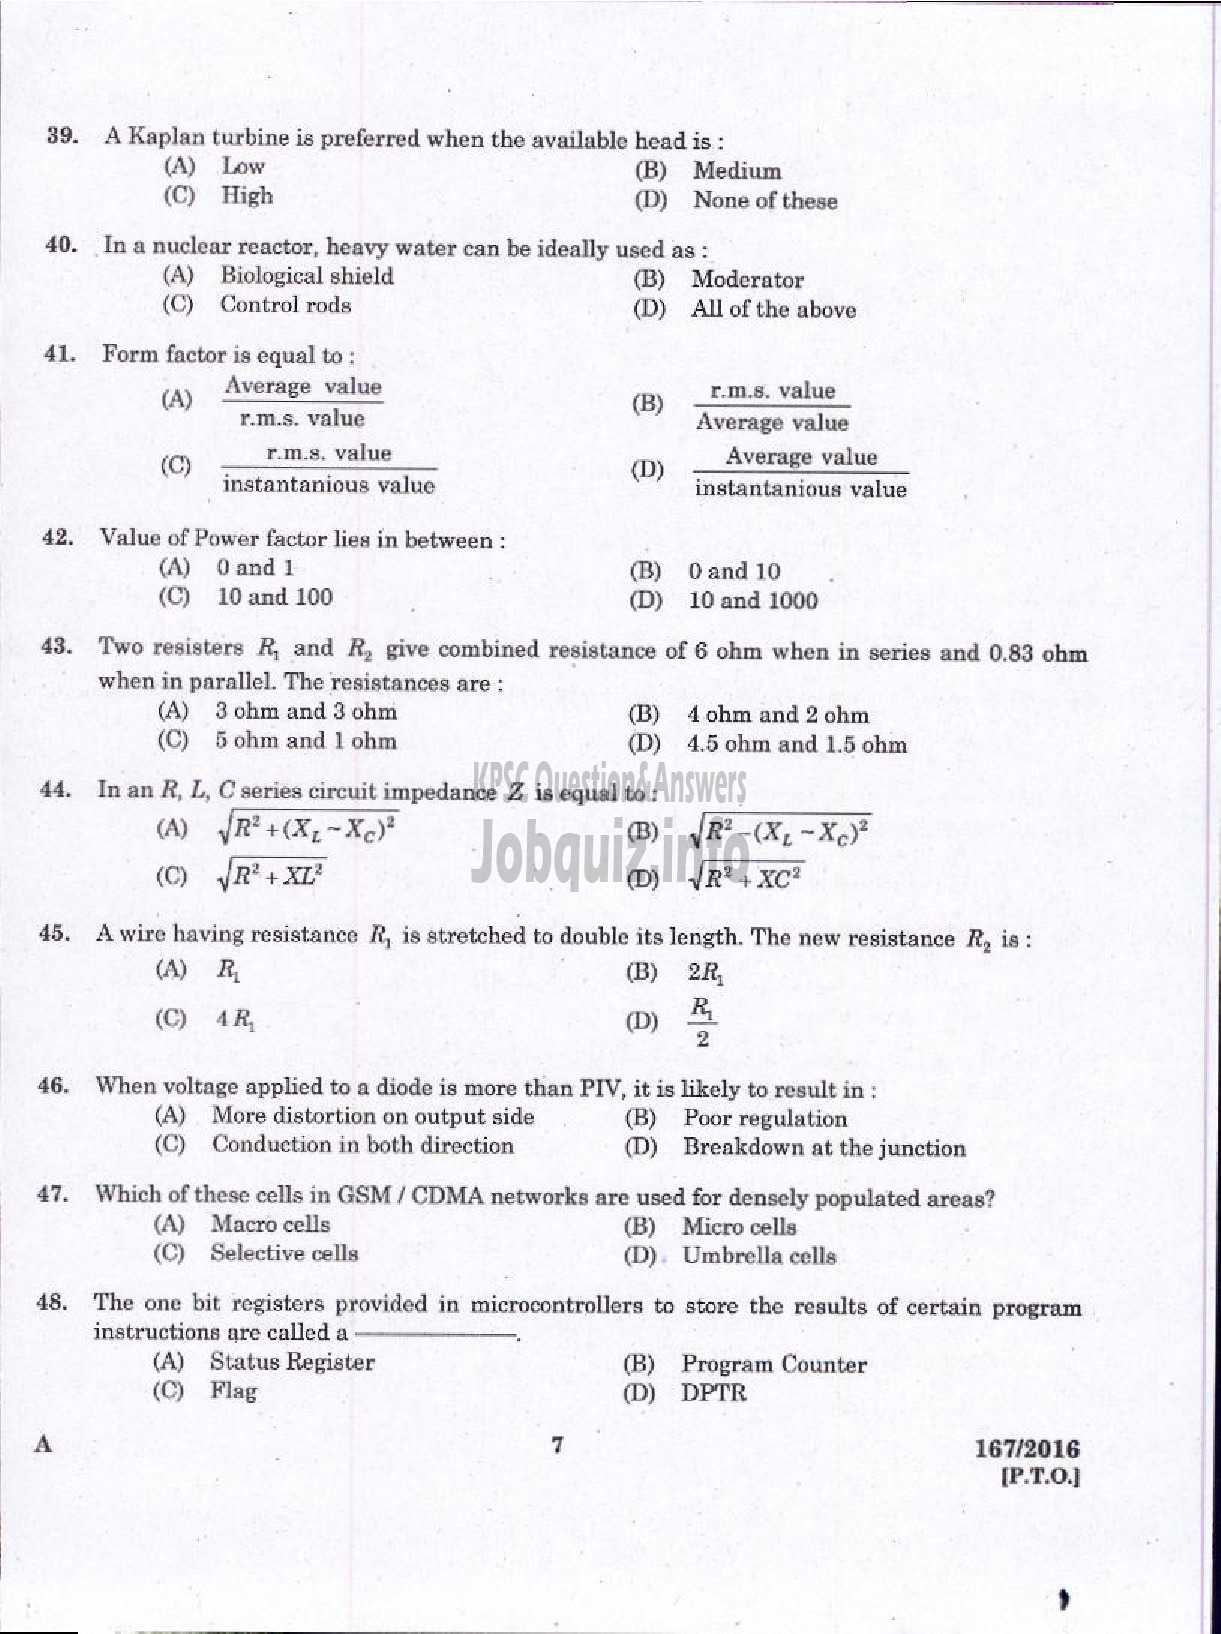 Kerala PSC Question Paper - LECTURER IN ELECTRICAL AND ELECTRONICS ENGINEERING GOVST POLYTECHNICS TECHNICAL EDUCATION-5